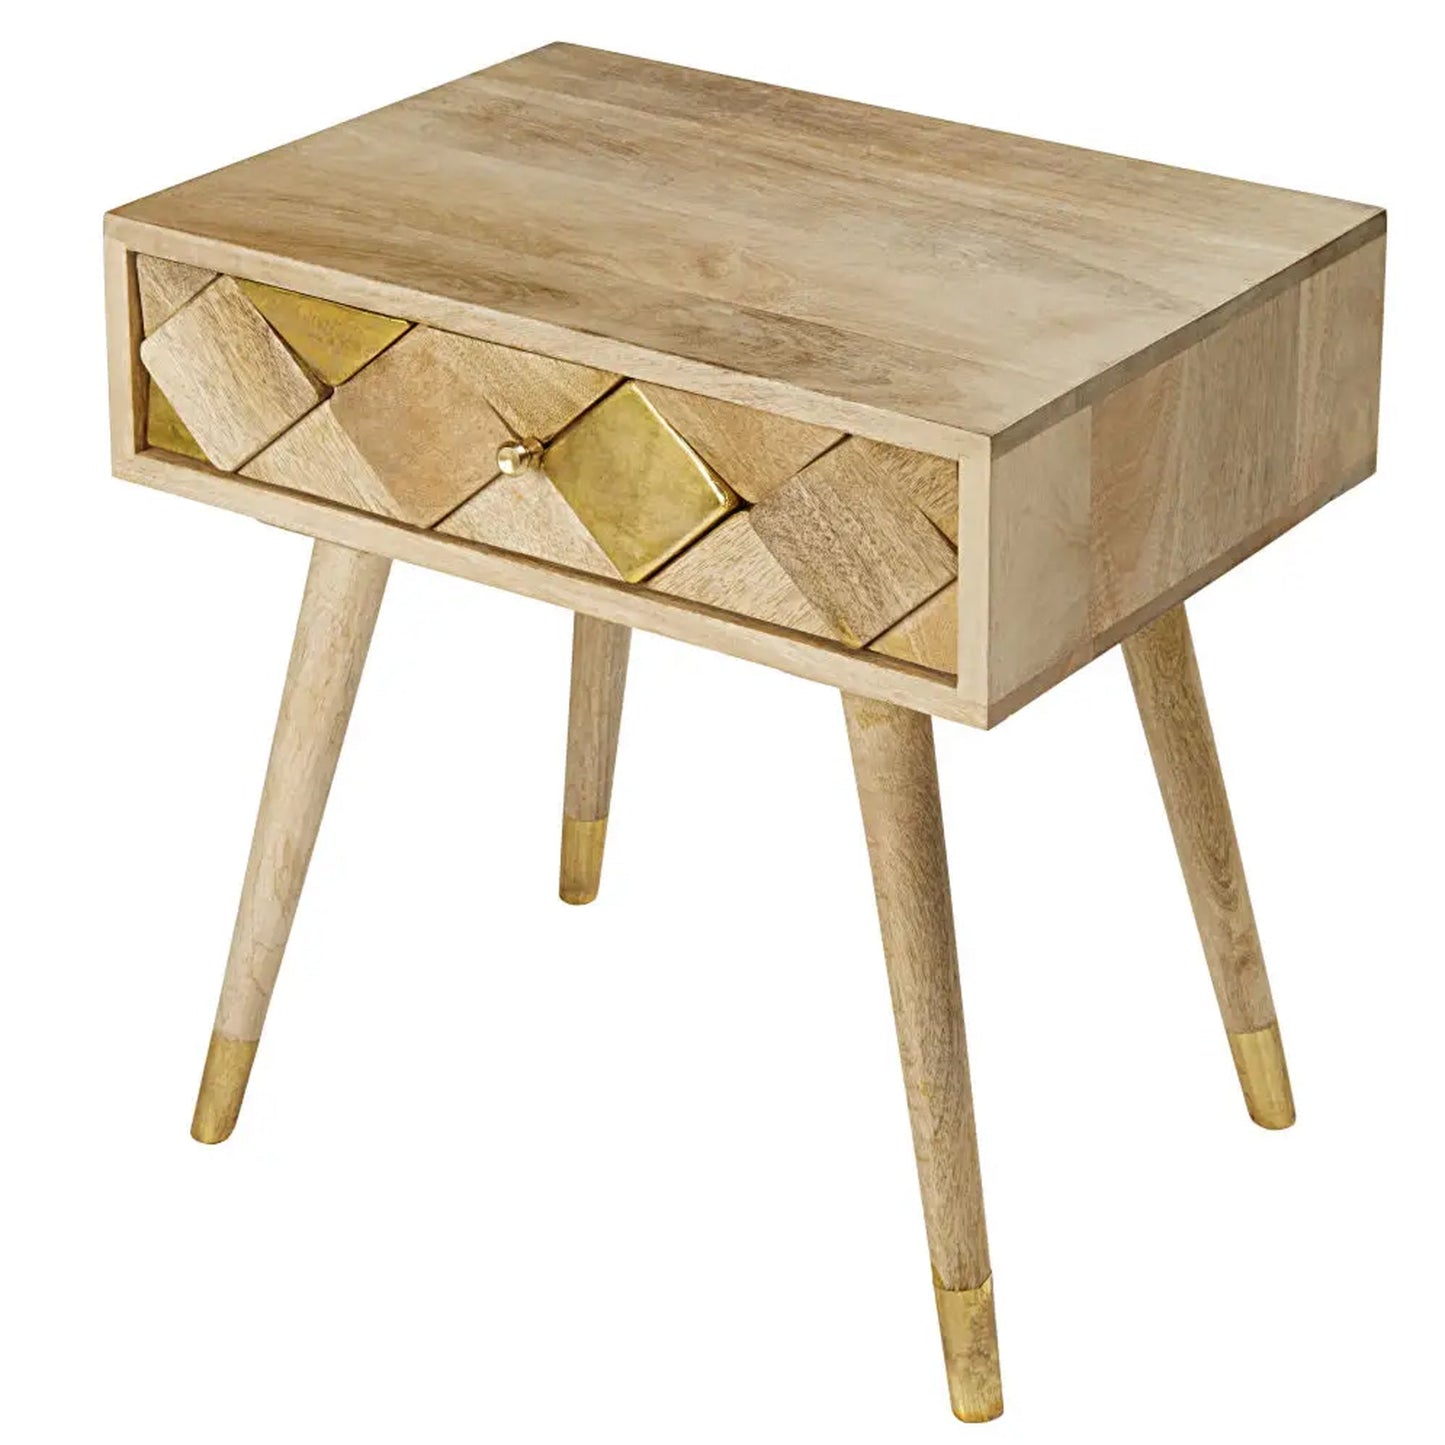 Alen Solidwood Bed Side Table -Natural Finish